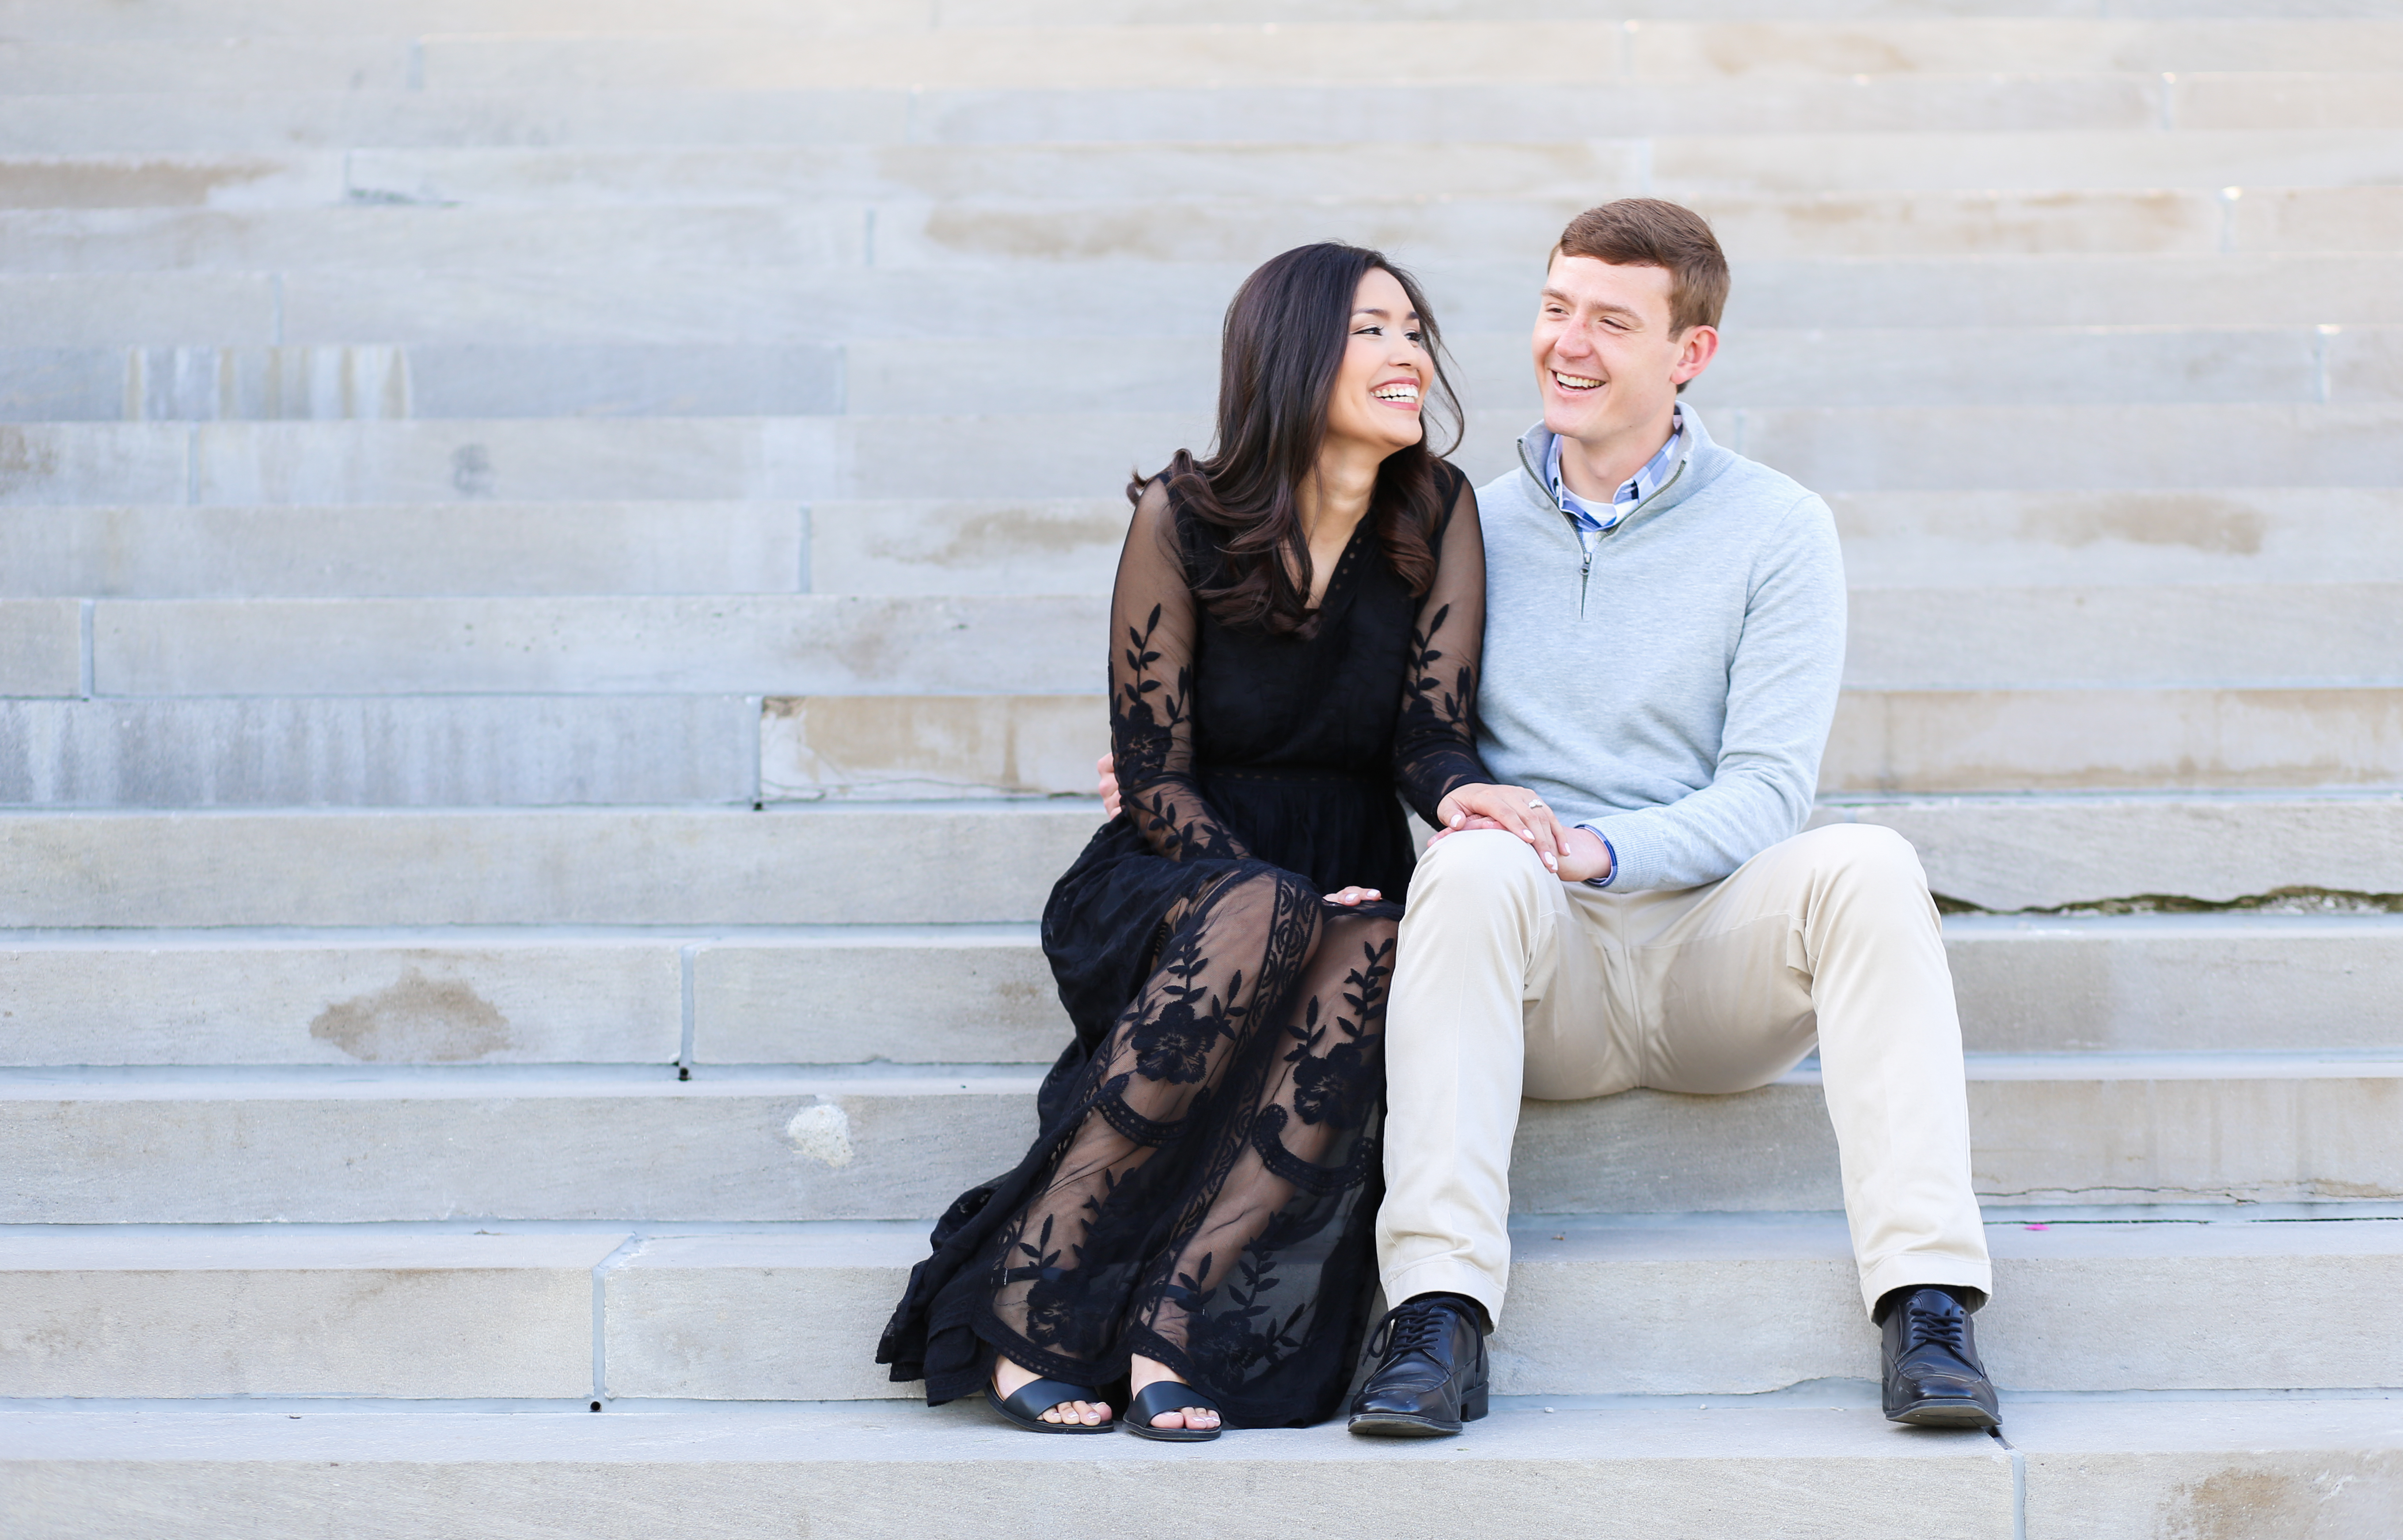 Nelson Atkins Museum - Engagement Photos at Nelson Atkins Museum - Where to take engagement photos - Kansas City - Museum of Art _ Engagement and Wedding Photographer Best Wedding Photographer - Kansas City Portrait & Wedding Photography - Mariam Saifan